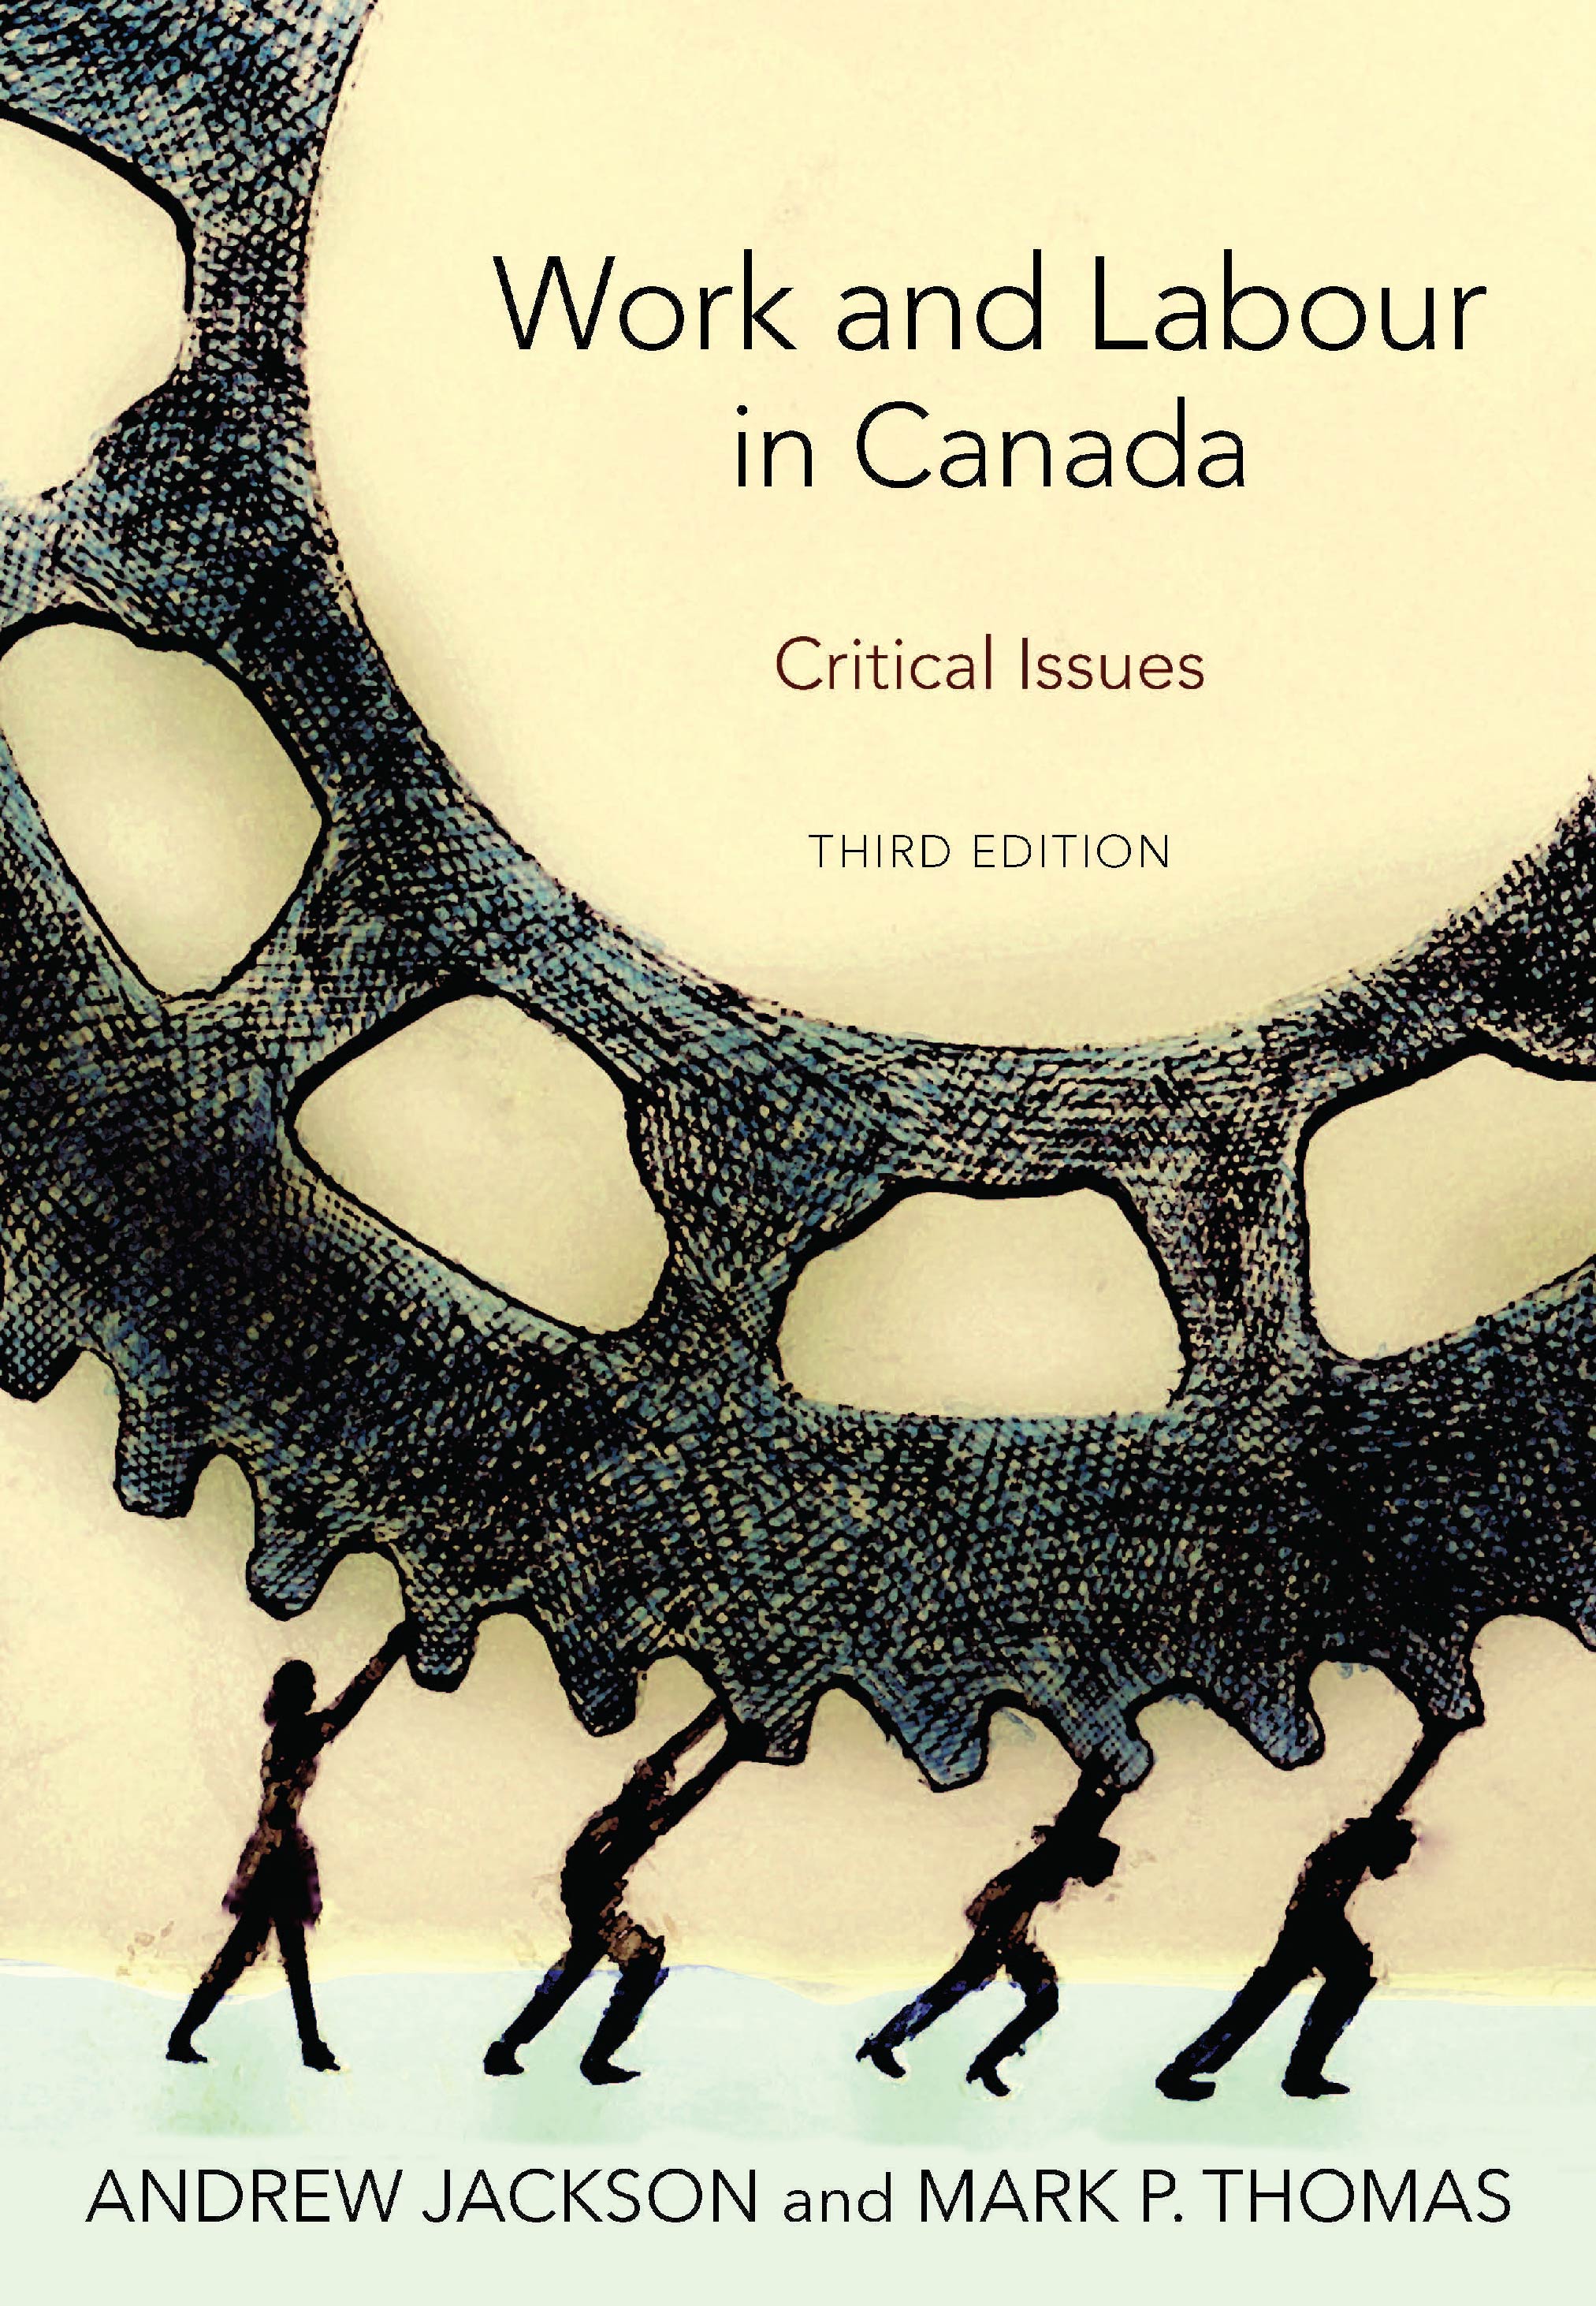 Work and Labour in Canada, Third Edition